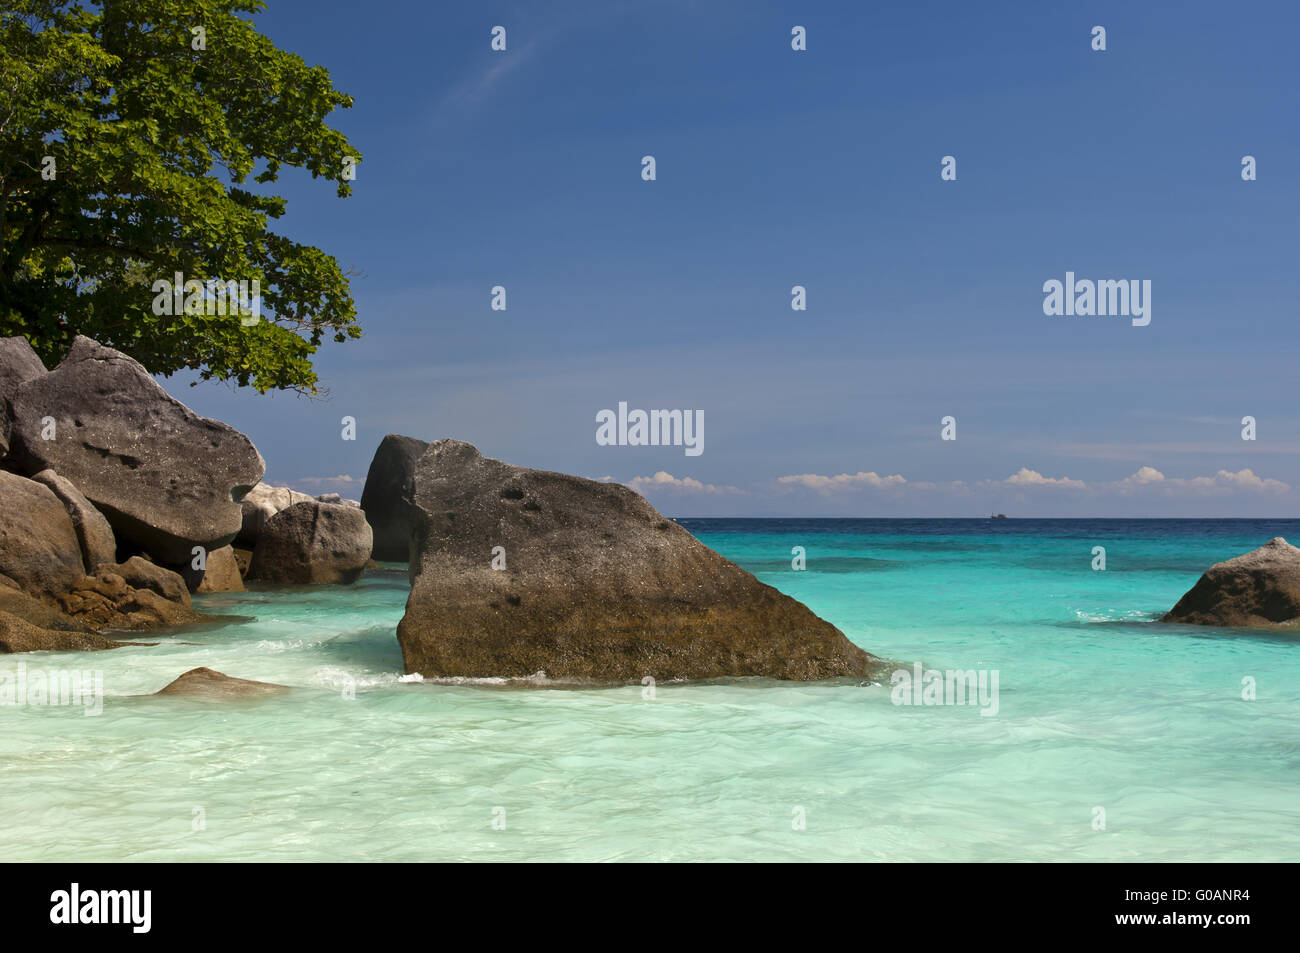 Granite boulders on the Similan Islands,Thailand Stock Photo